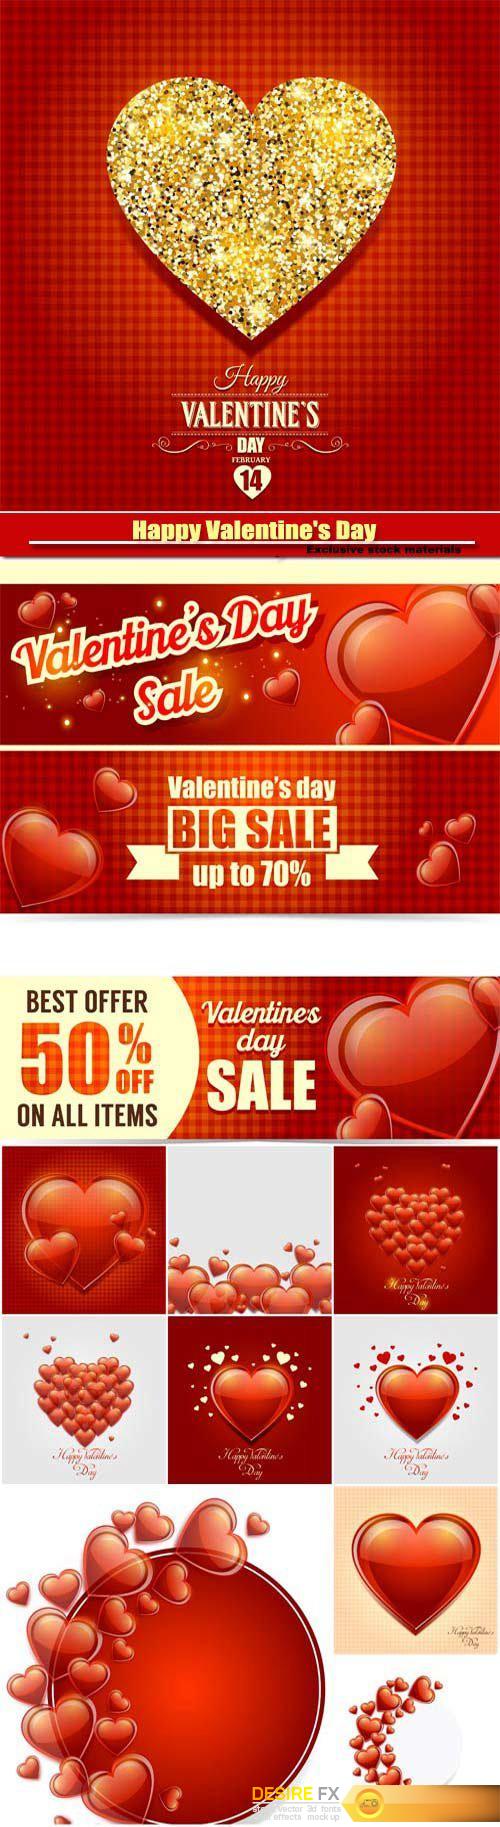 Vector backgrounds with hearts for Valentine's Day